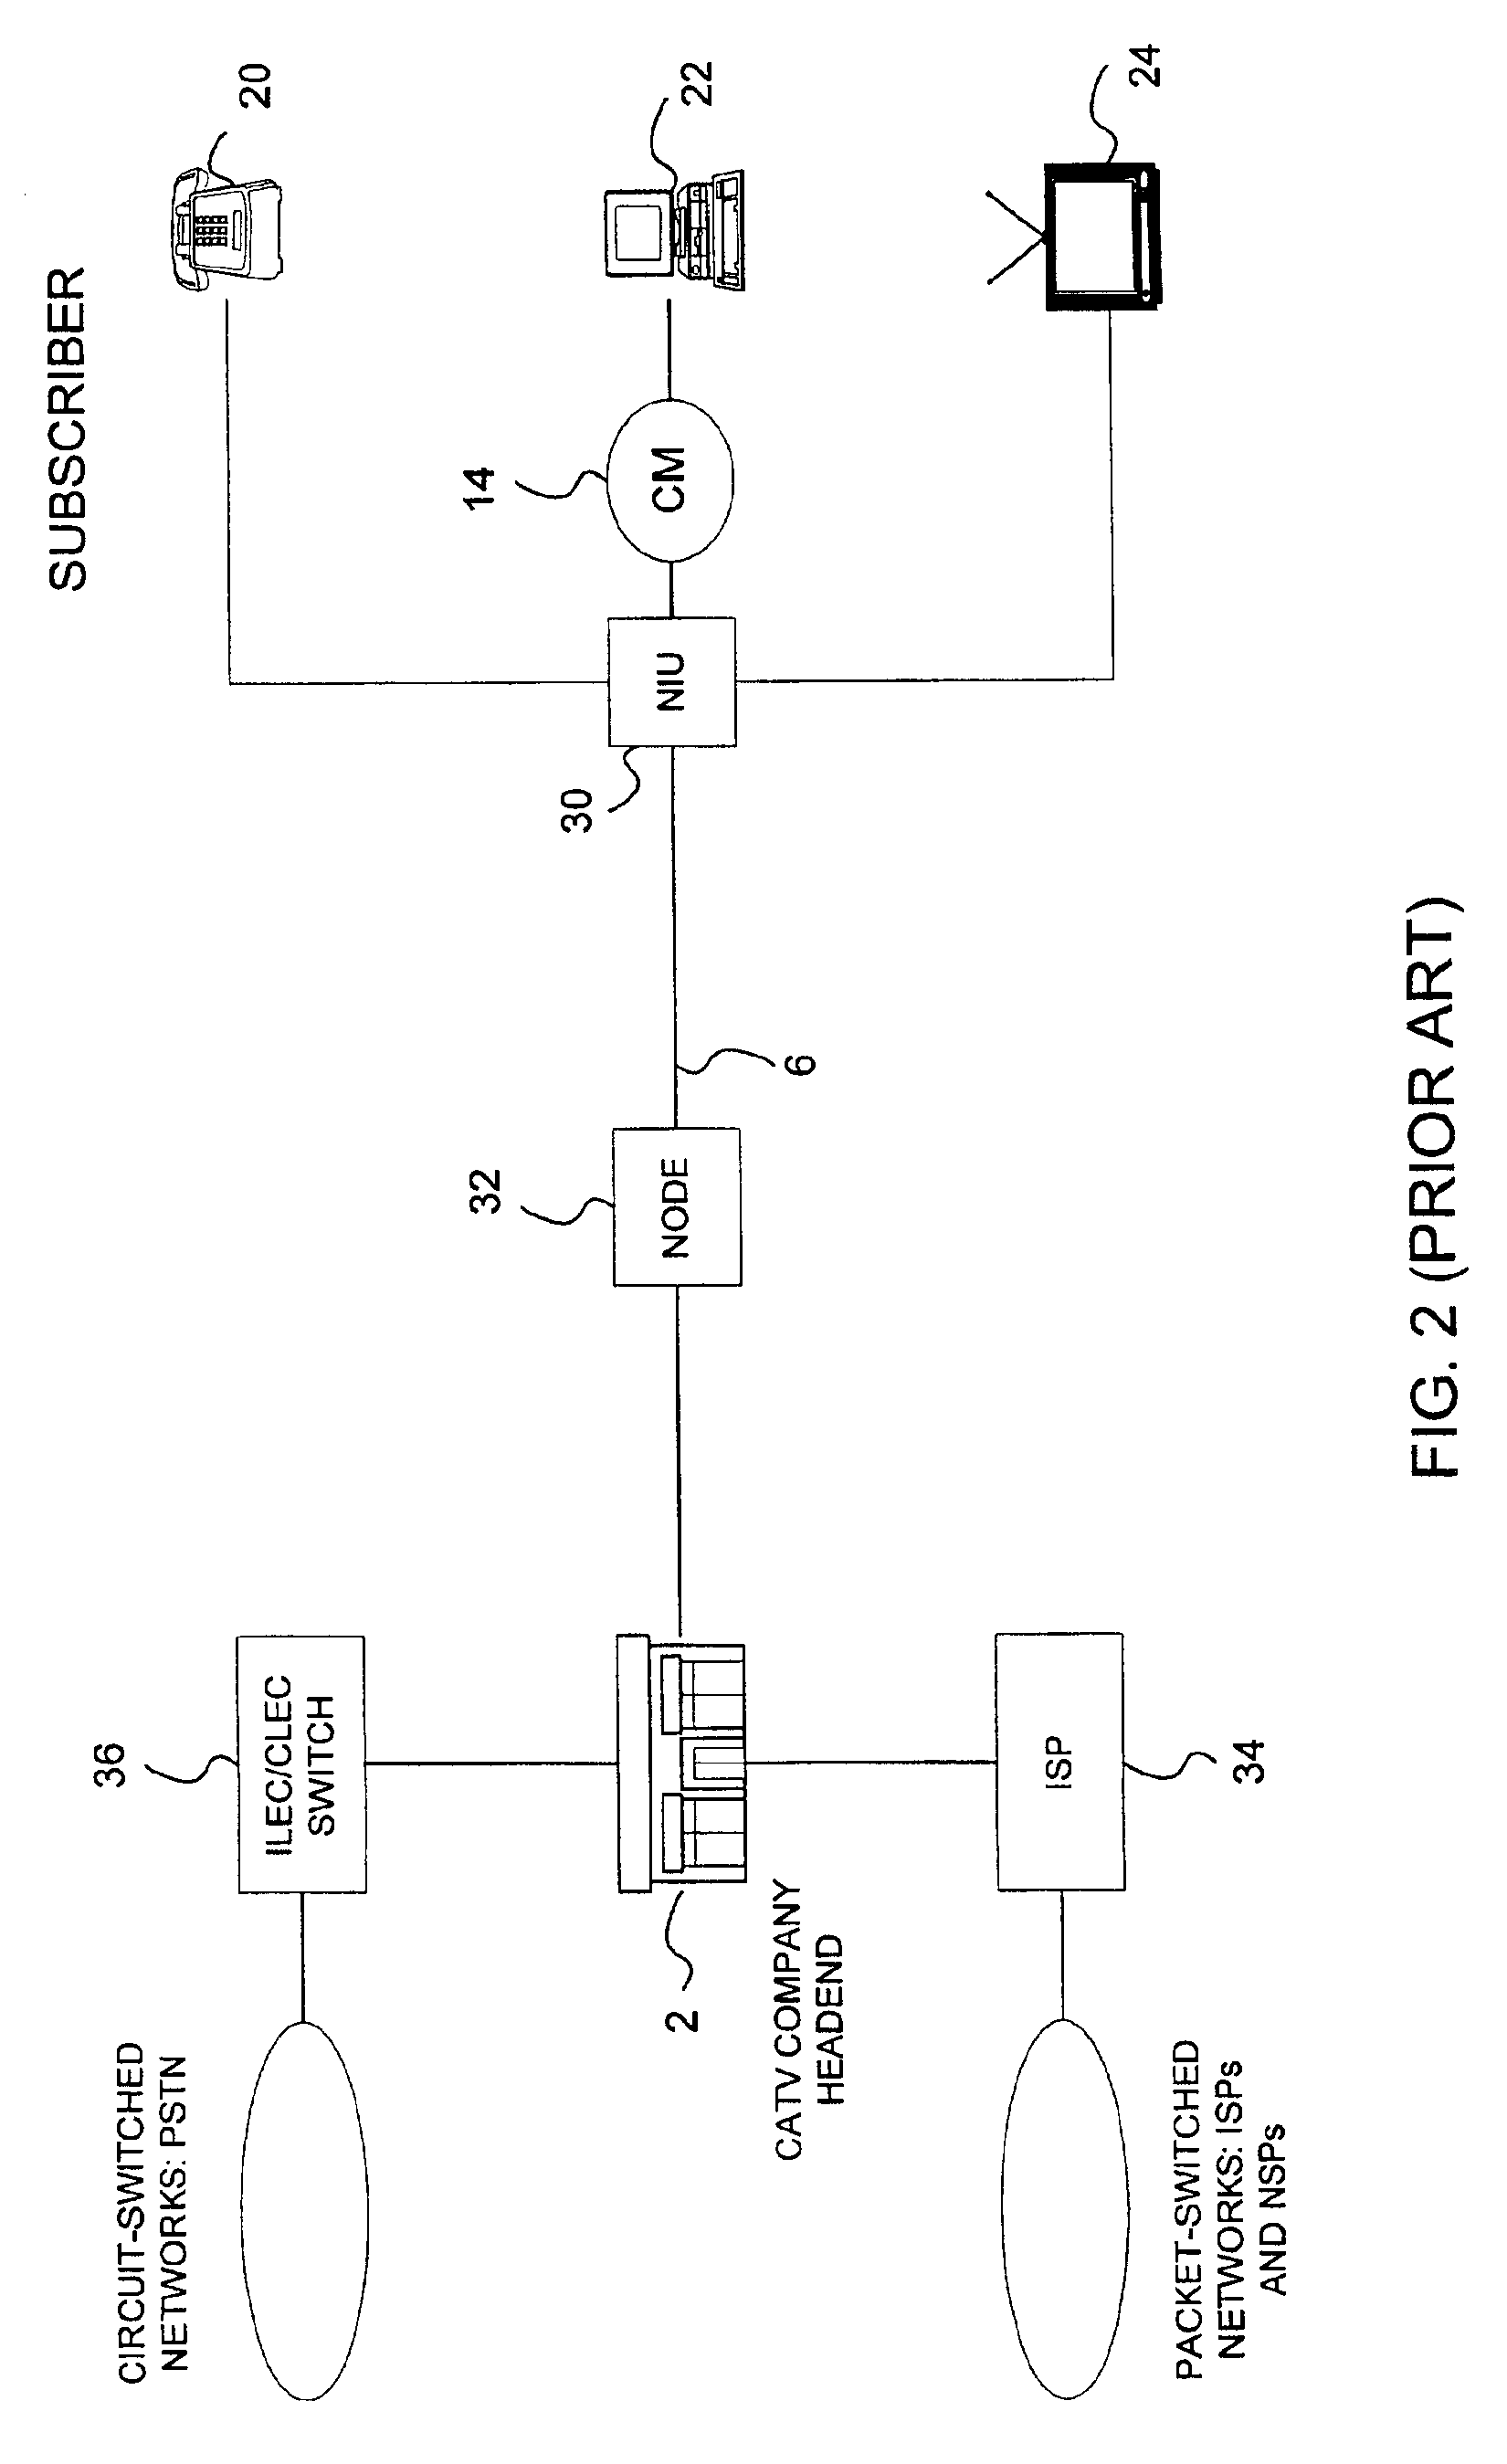 Method for increasing physical layer flexibility in cable modem systems